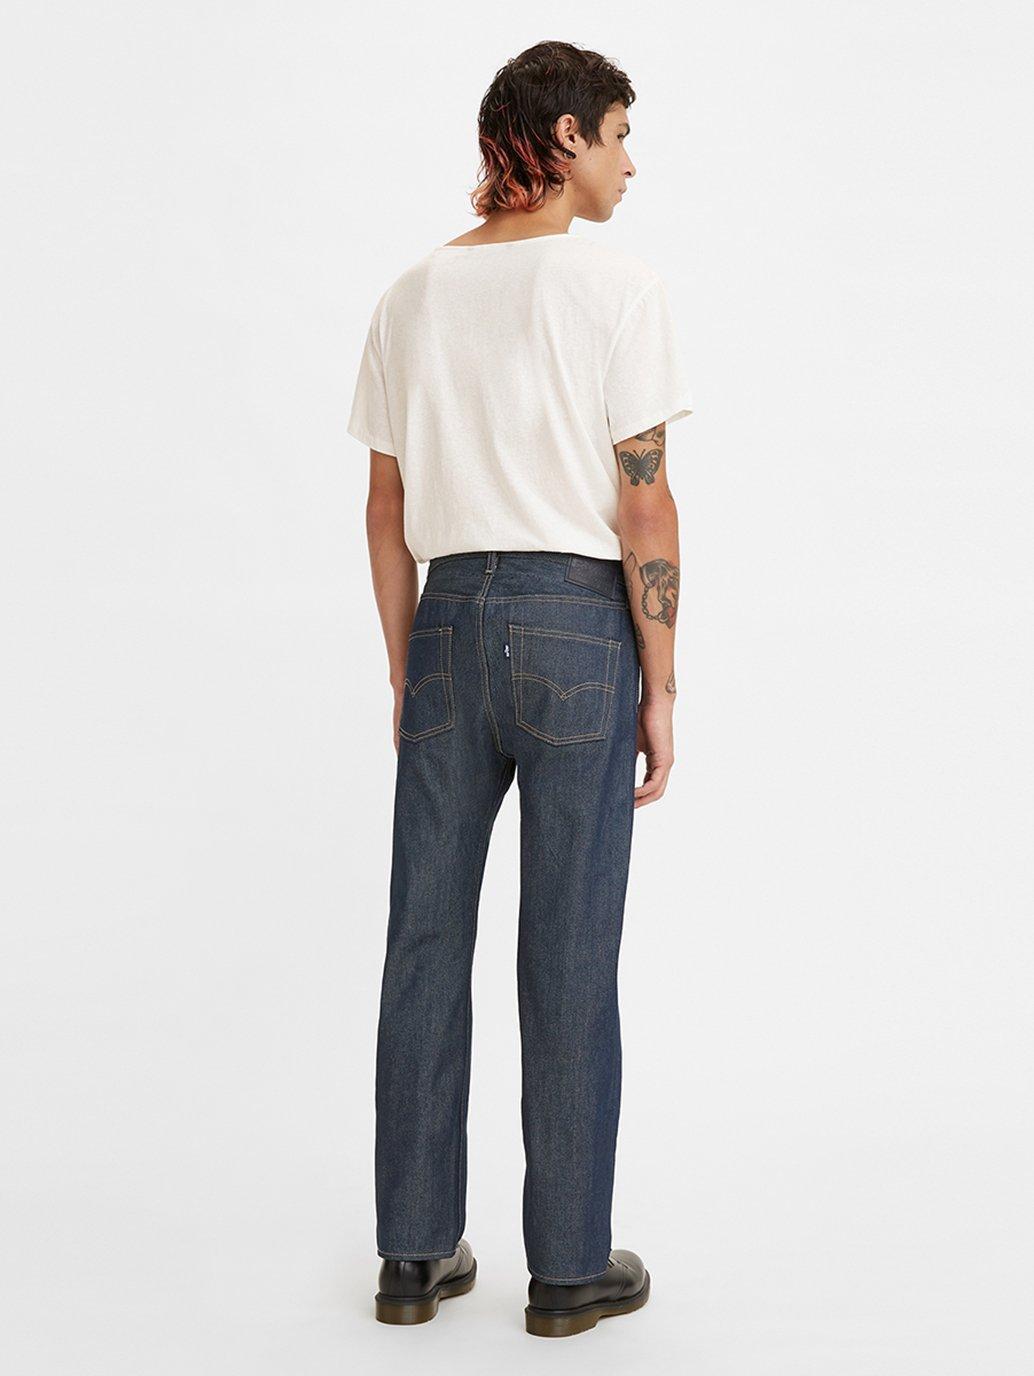 Buy Levi's® Made & Crafted® Men's 1980S 501® Jeans | Levi’s® Official ...